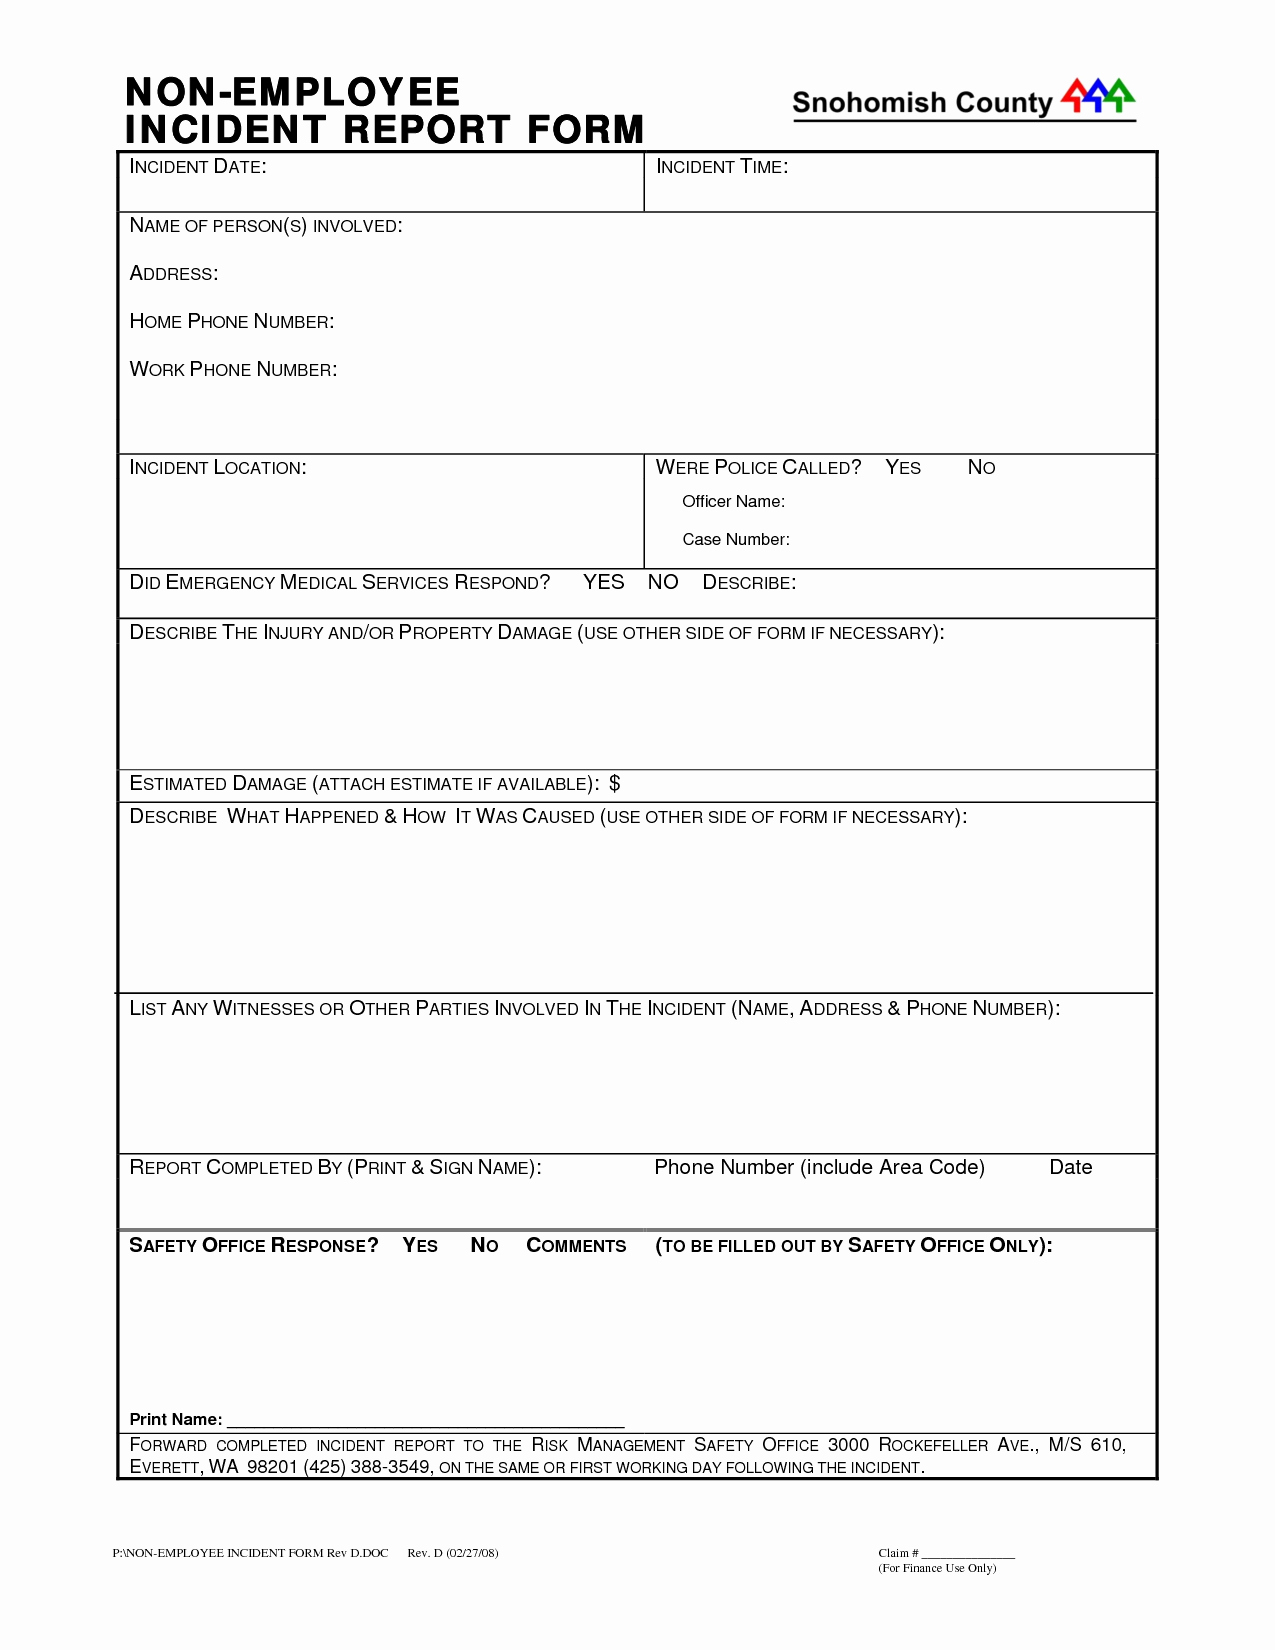 Employee Nt Report Form Pdf Hse Template Format For Safety With Regard To Accident Report Form Template Uk